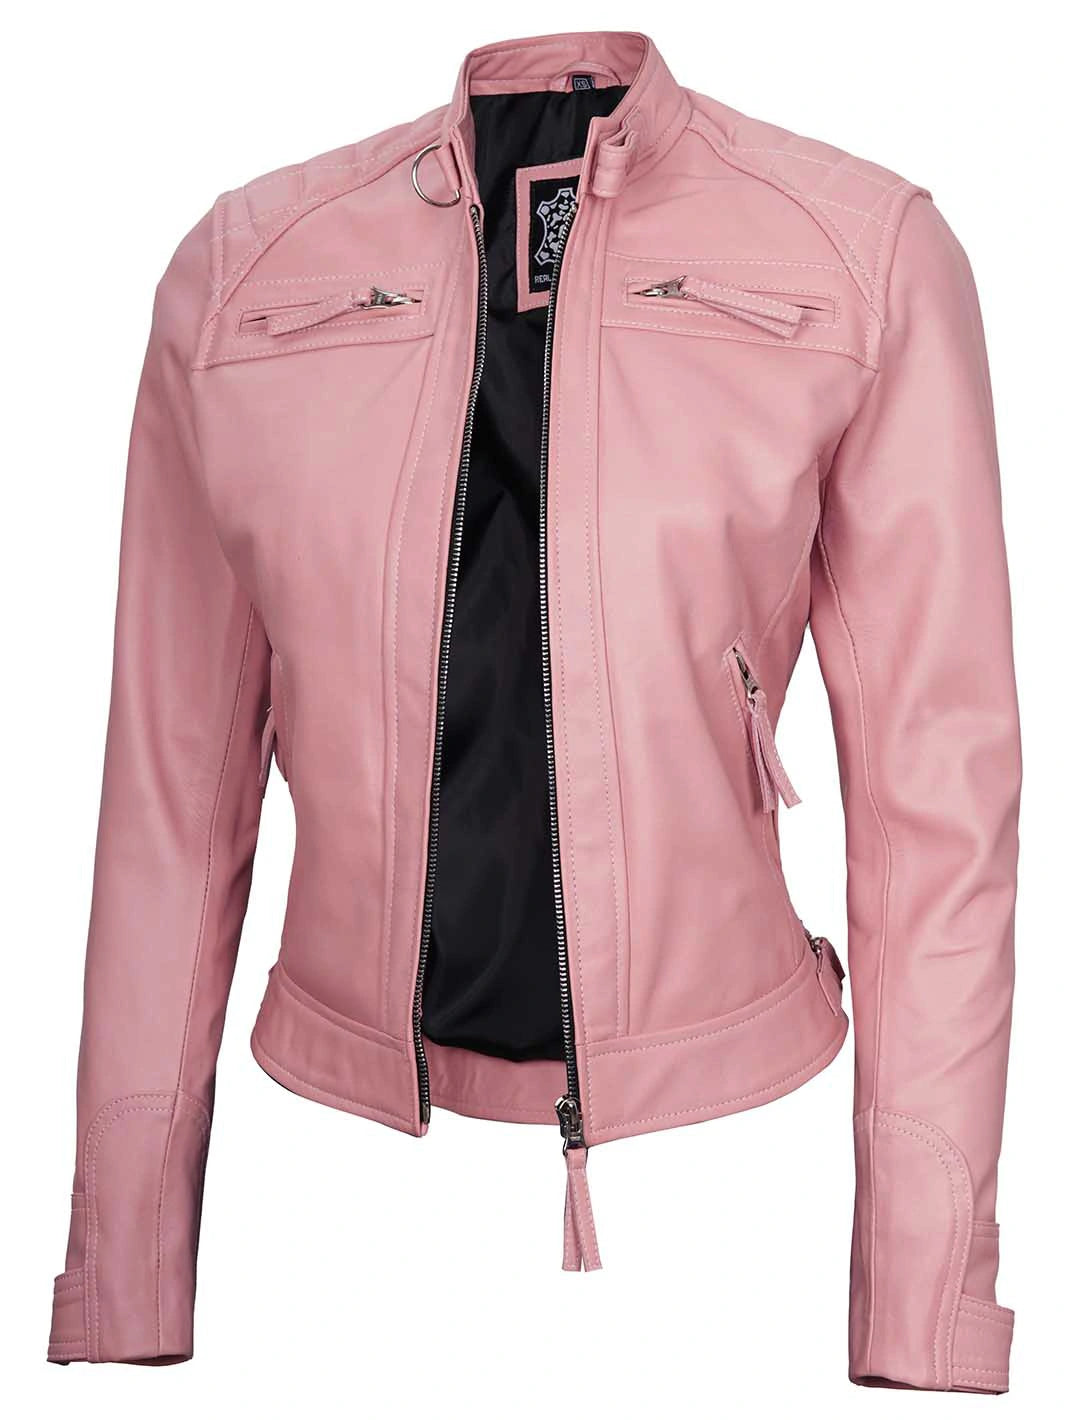 Womens cafe racer leather jacket